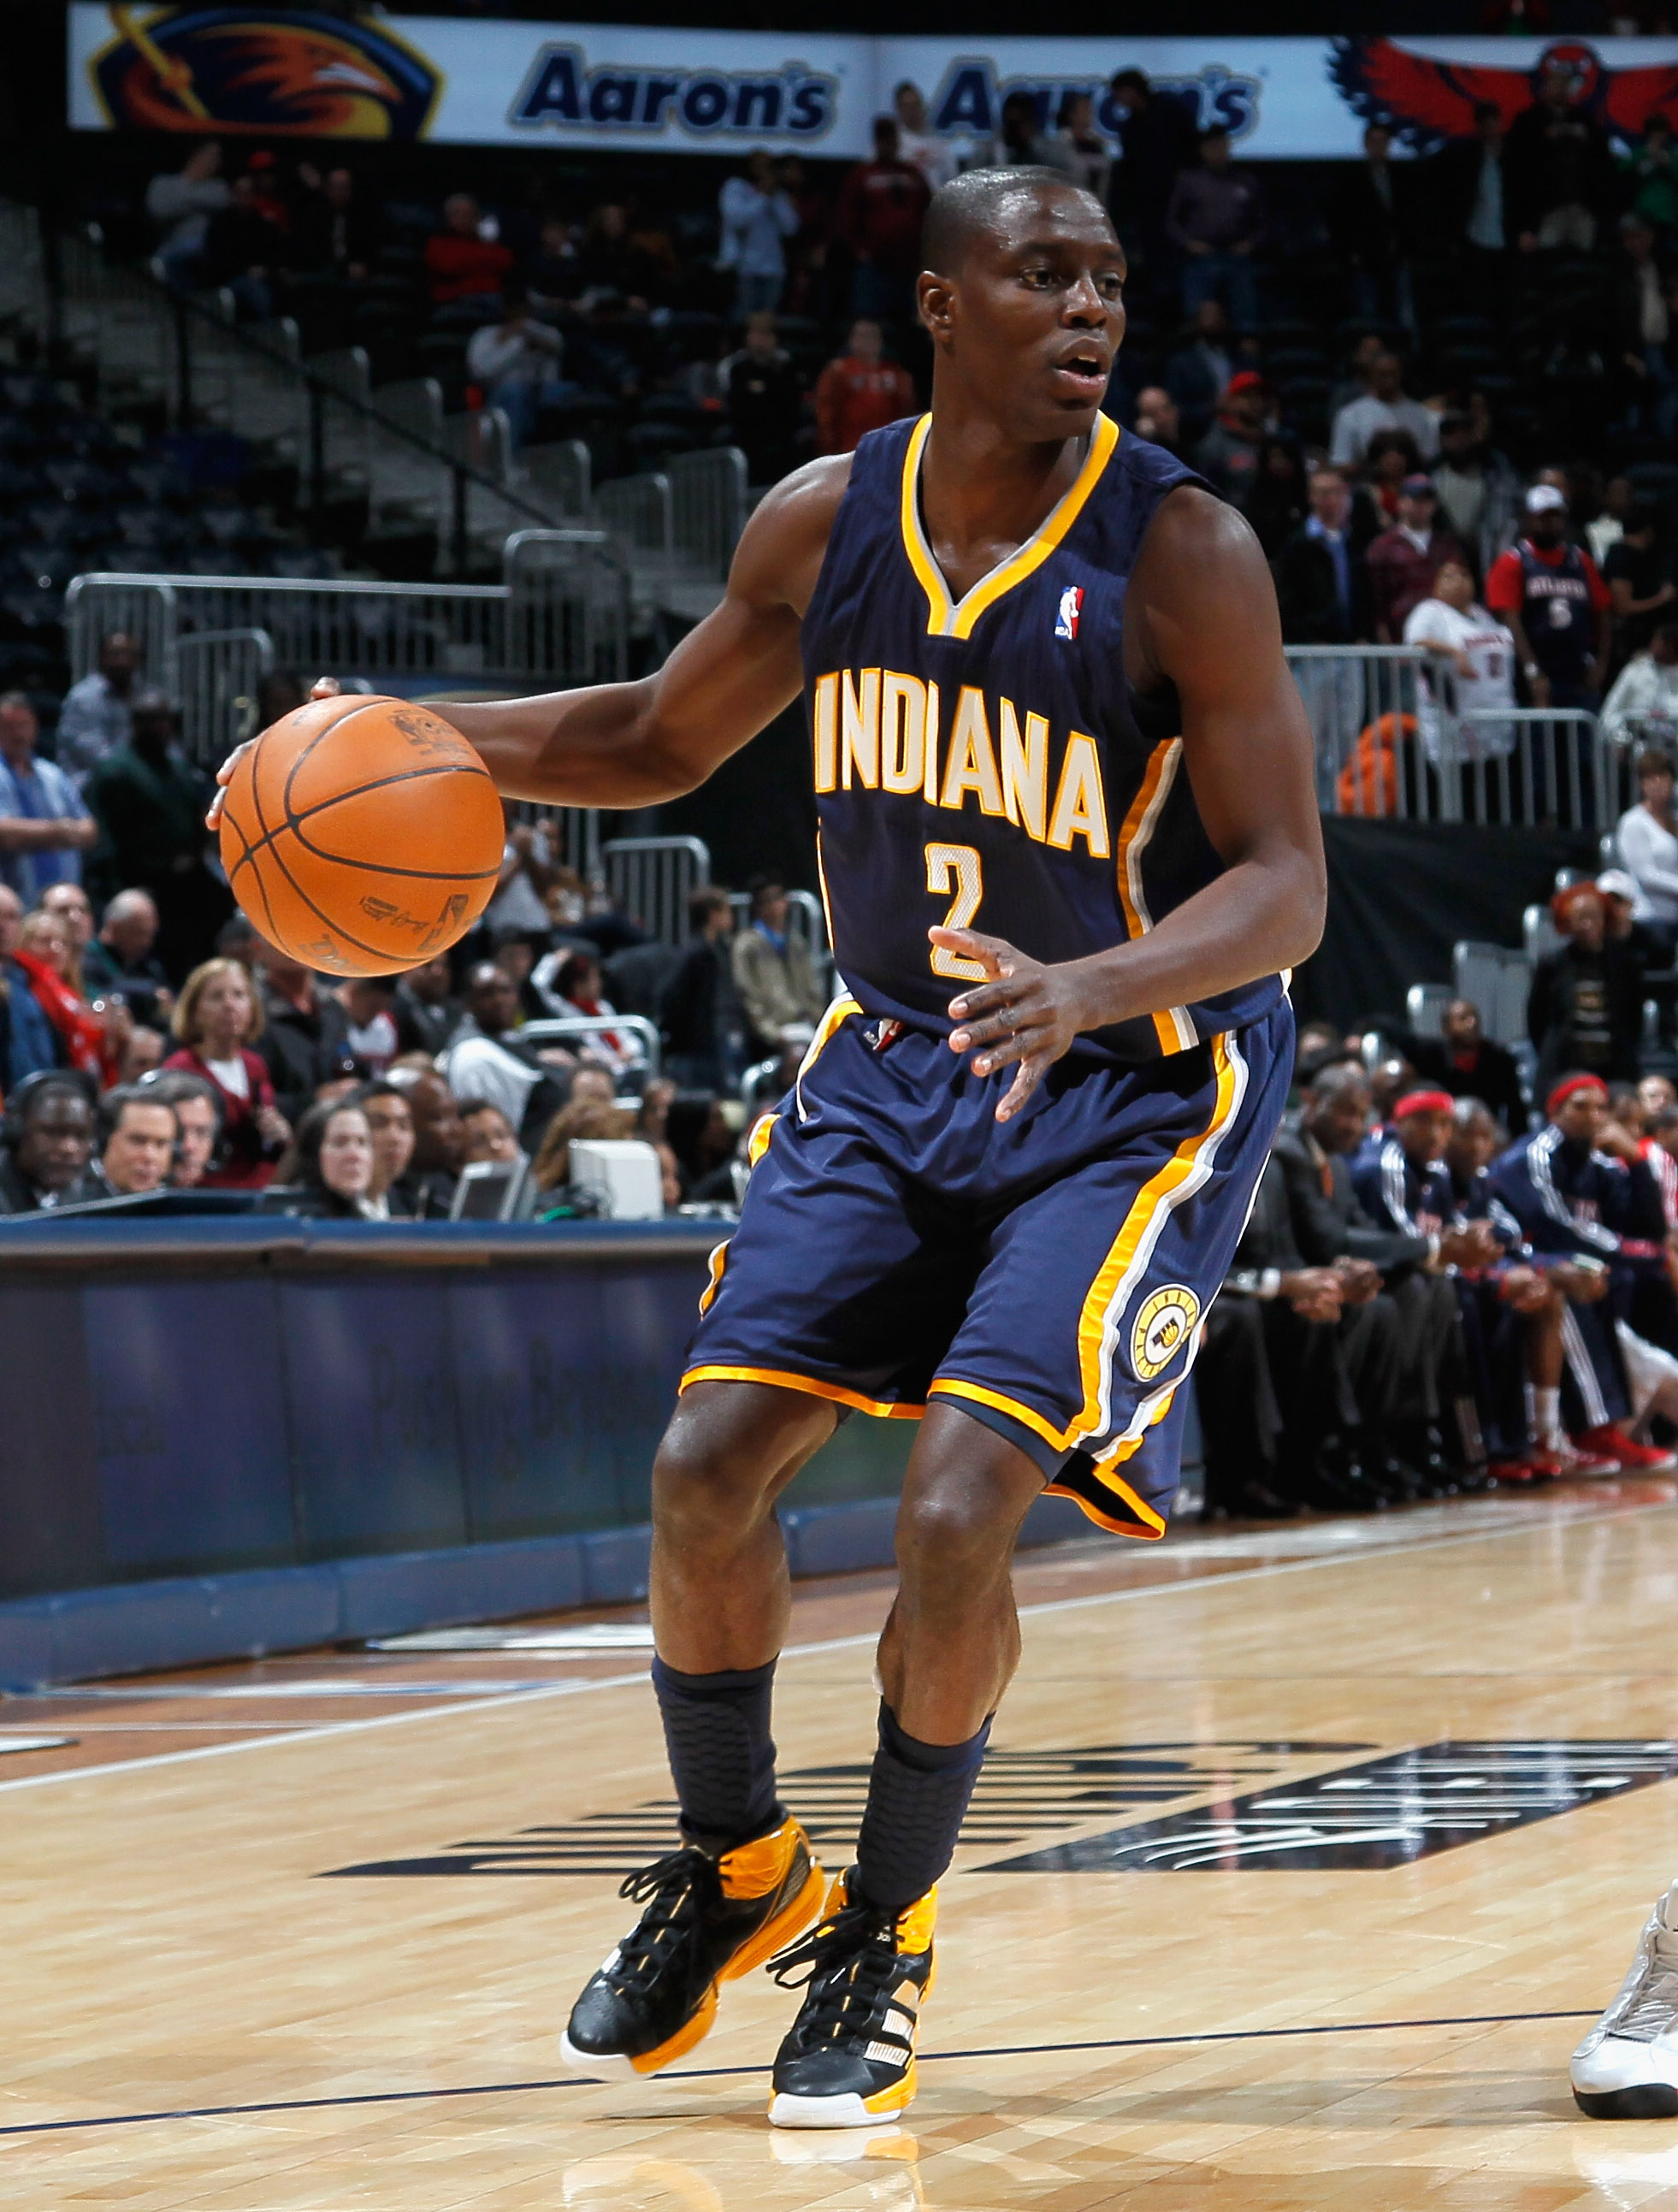 ATLANTA, GA - DECEMBER 11:  Darren Collison #2 of the Indiana Pacers against the Atlanta Hawks at Philips Arena on December 11, 2010 in Atlanta, Georgia.  NOTE TO USER: User expressly acknowledges and agrees that, by downloading and/or using this Photogra